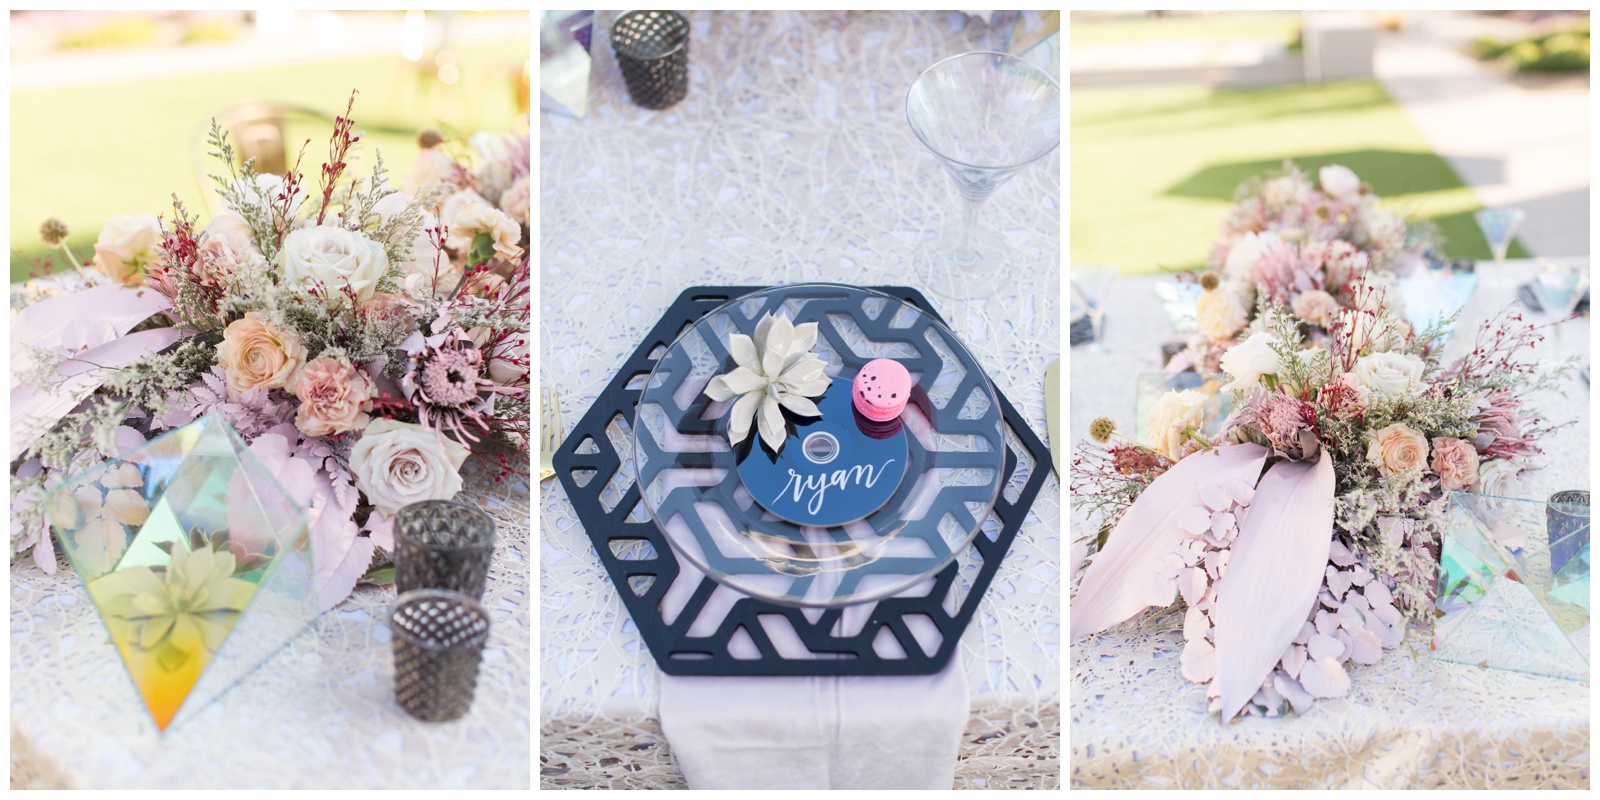 Record style wedding plates and blush pink floral centrepieces 